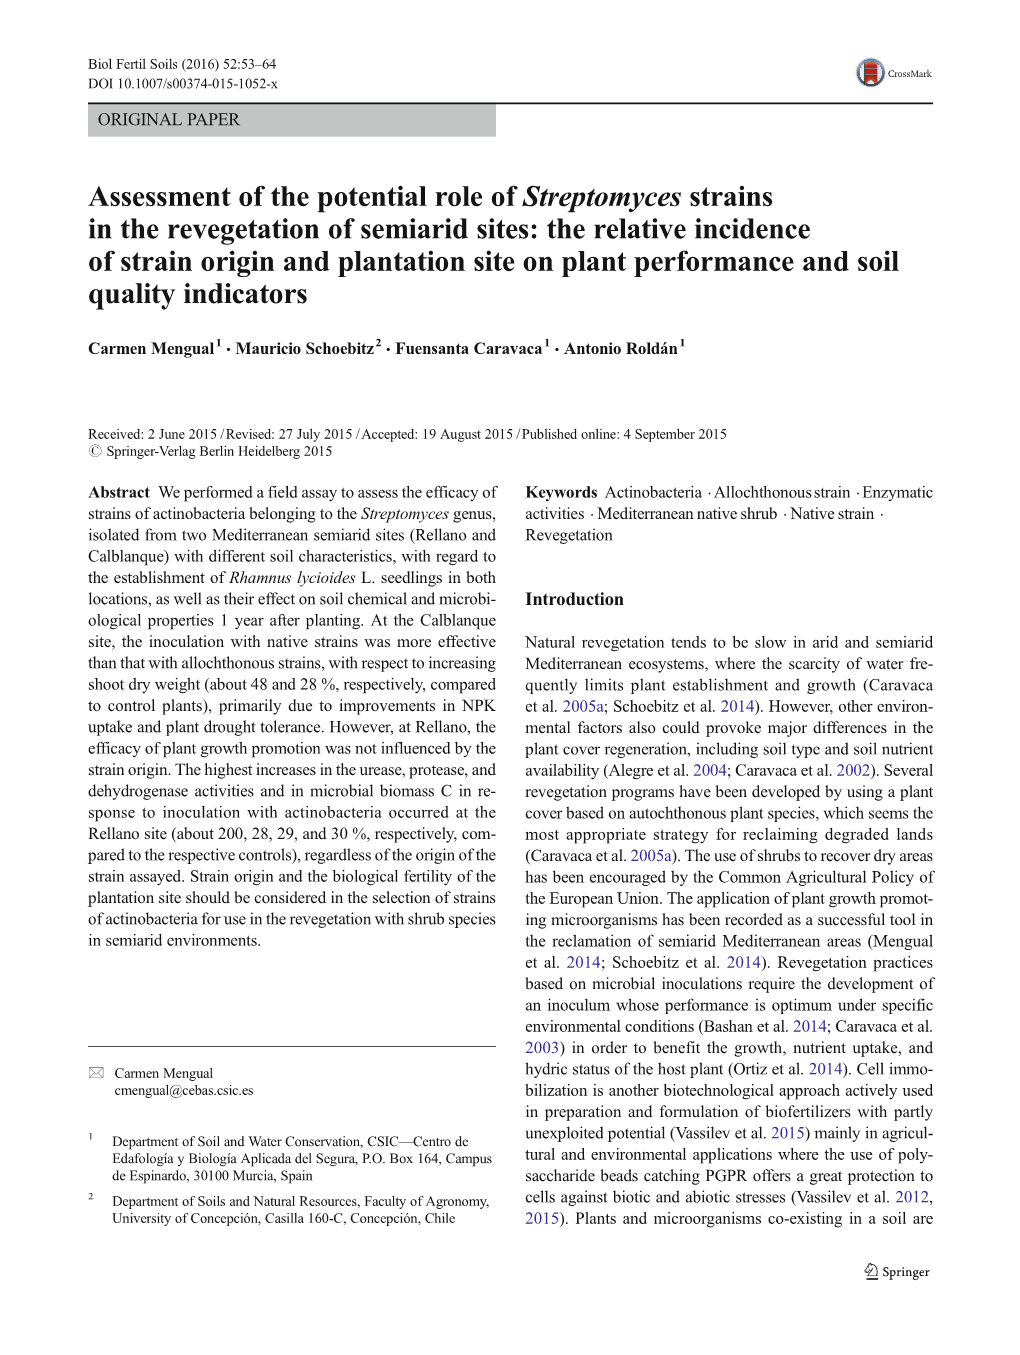 Assessment of the Potential Role of Streptomyces